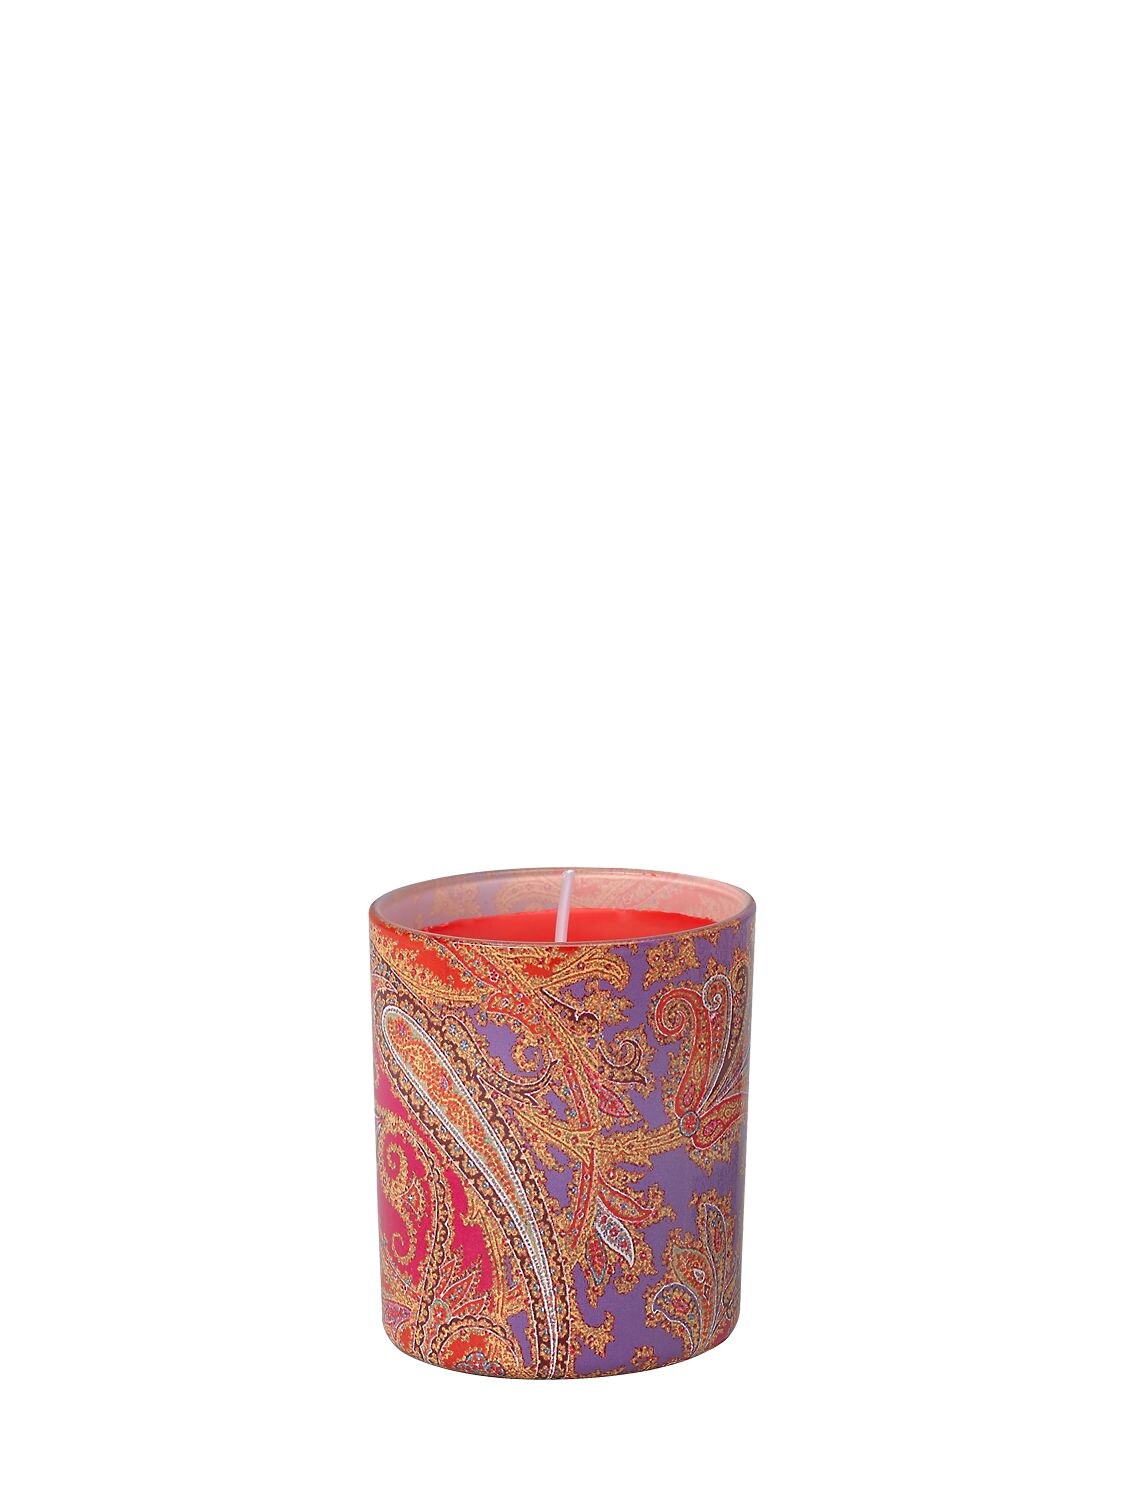 Etro Rajastan Scented Candle In Red,multi